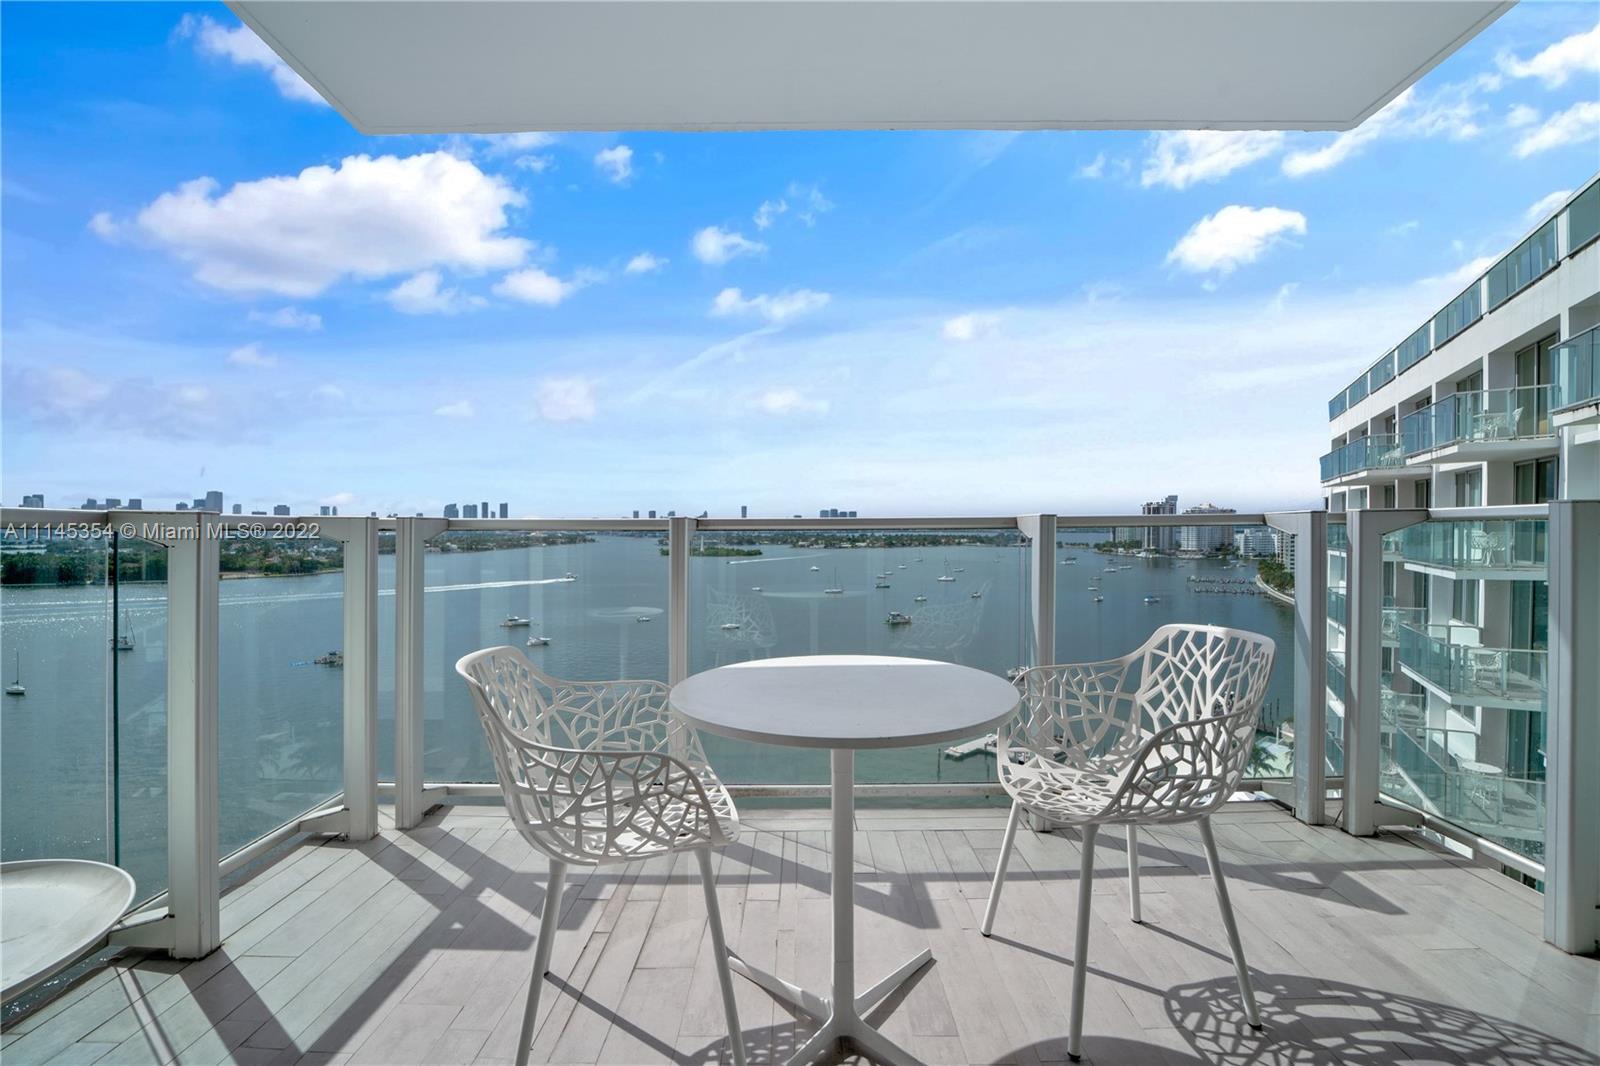 Miami's most trendy, 5-star condo-hotels. One of the most desirable units & views available with Miami's downtown skyline. Owner an income-producing property to offset your expenses. Live, rent, or do both. The unit is currently in the hotel program. The unit has upgraded furniture.